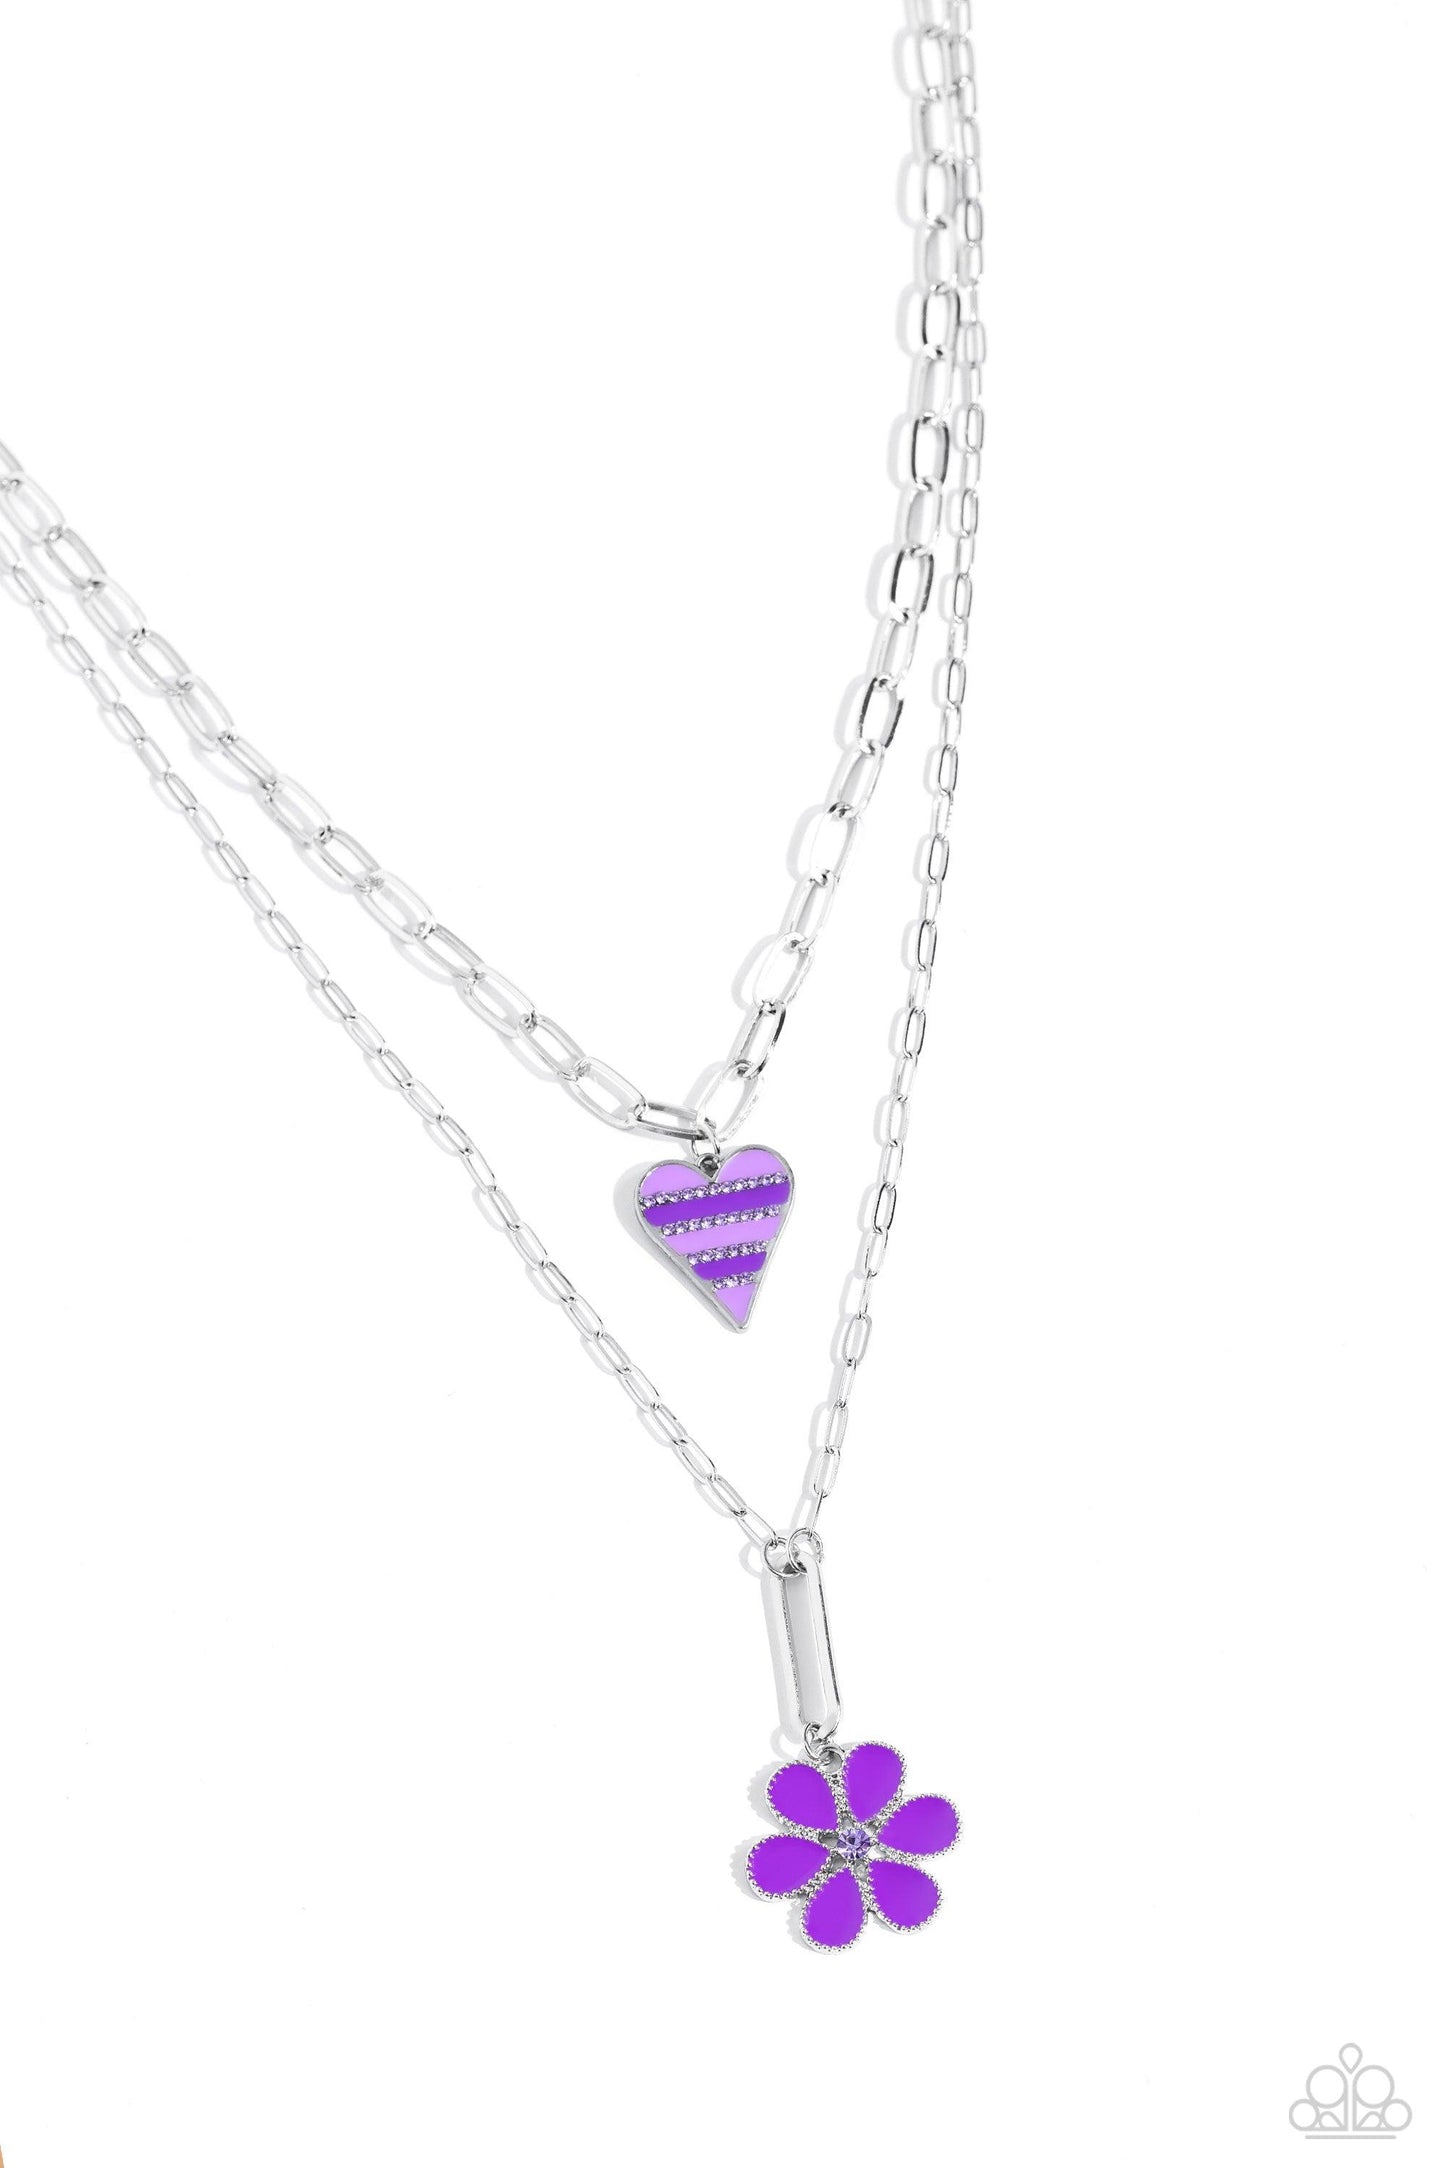 Paparazzi Accessories - Childhood Charms - Purple Necklace - Bling by JessieK